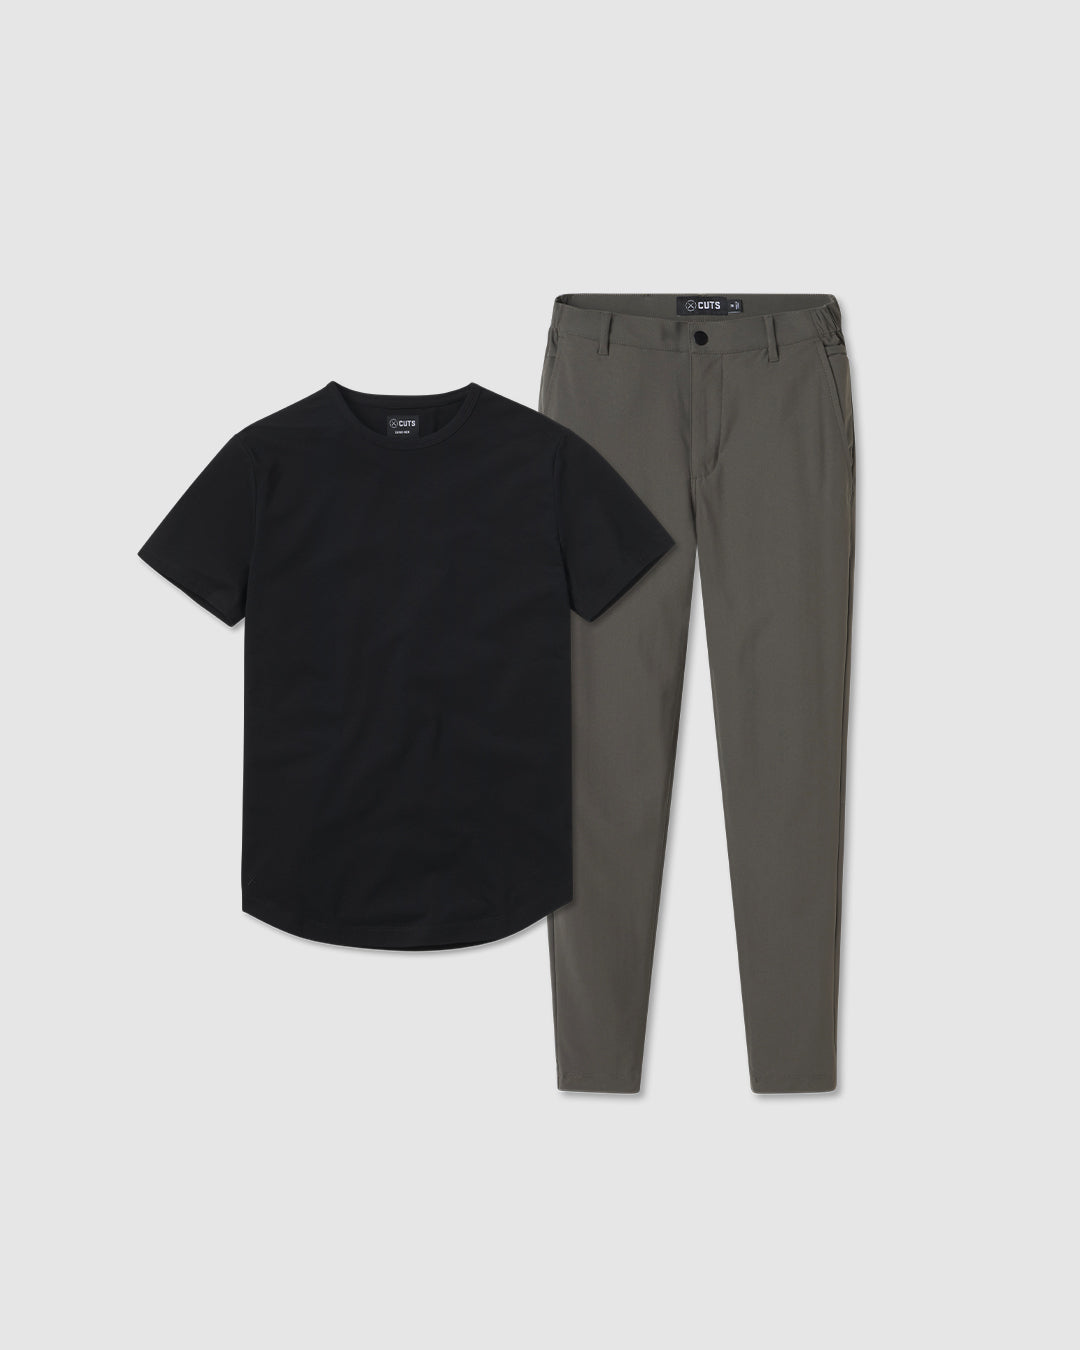 Kit flat lay featuring AO joggers in Dark Pine and a Black T-shirt